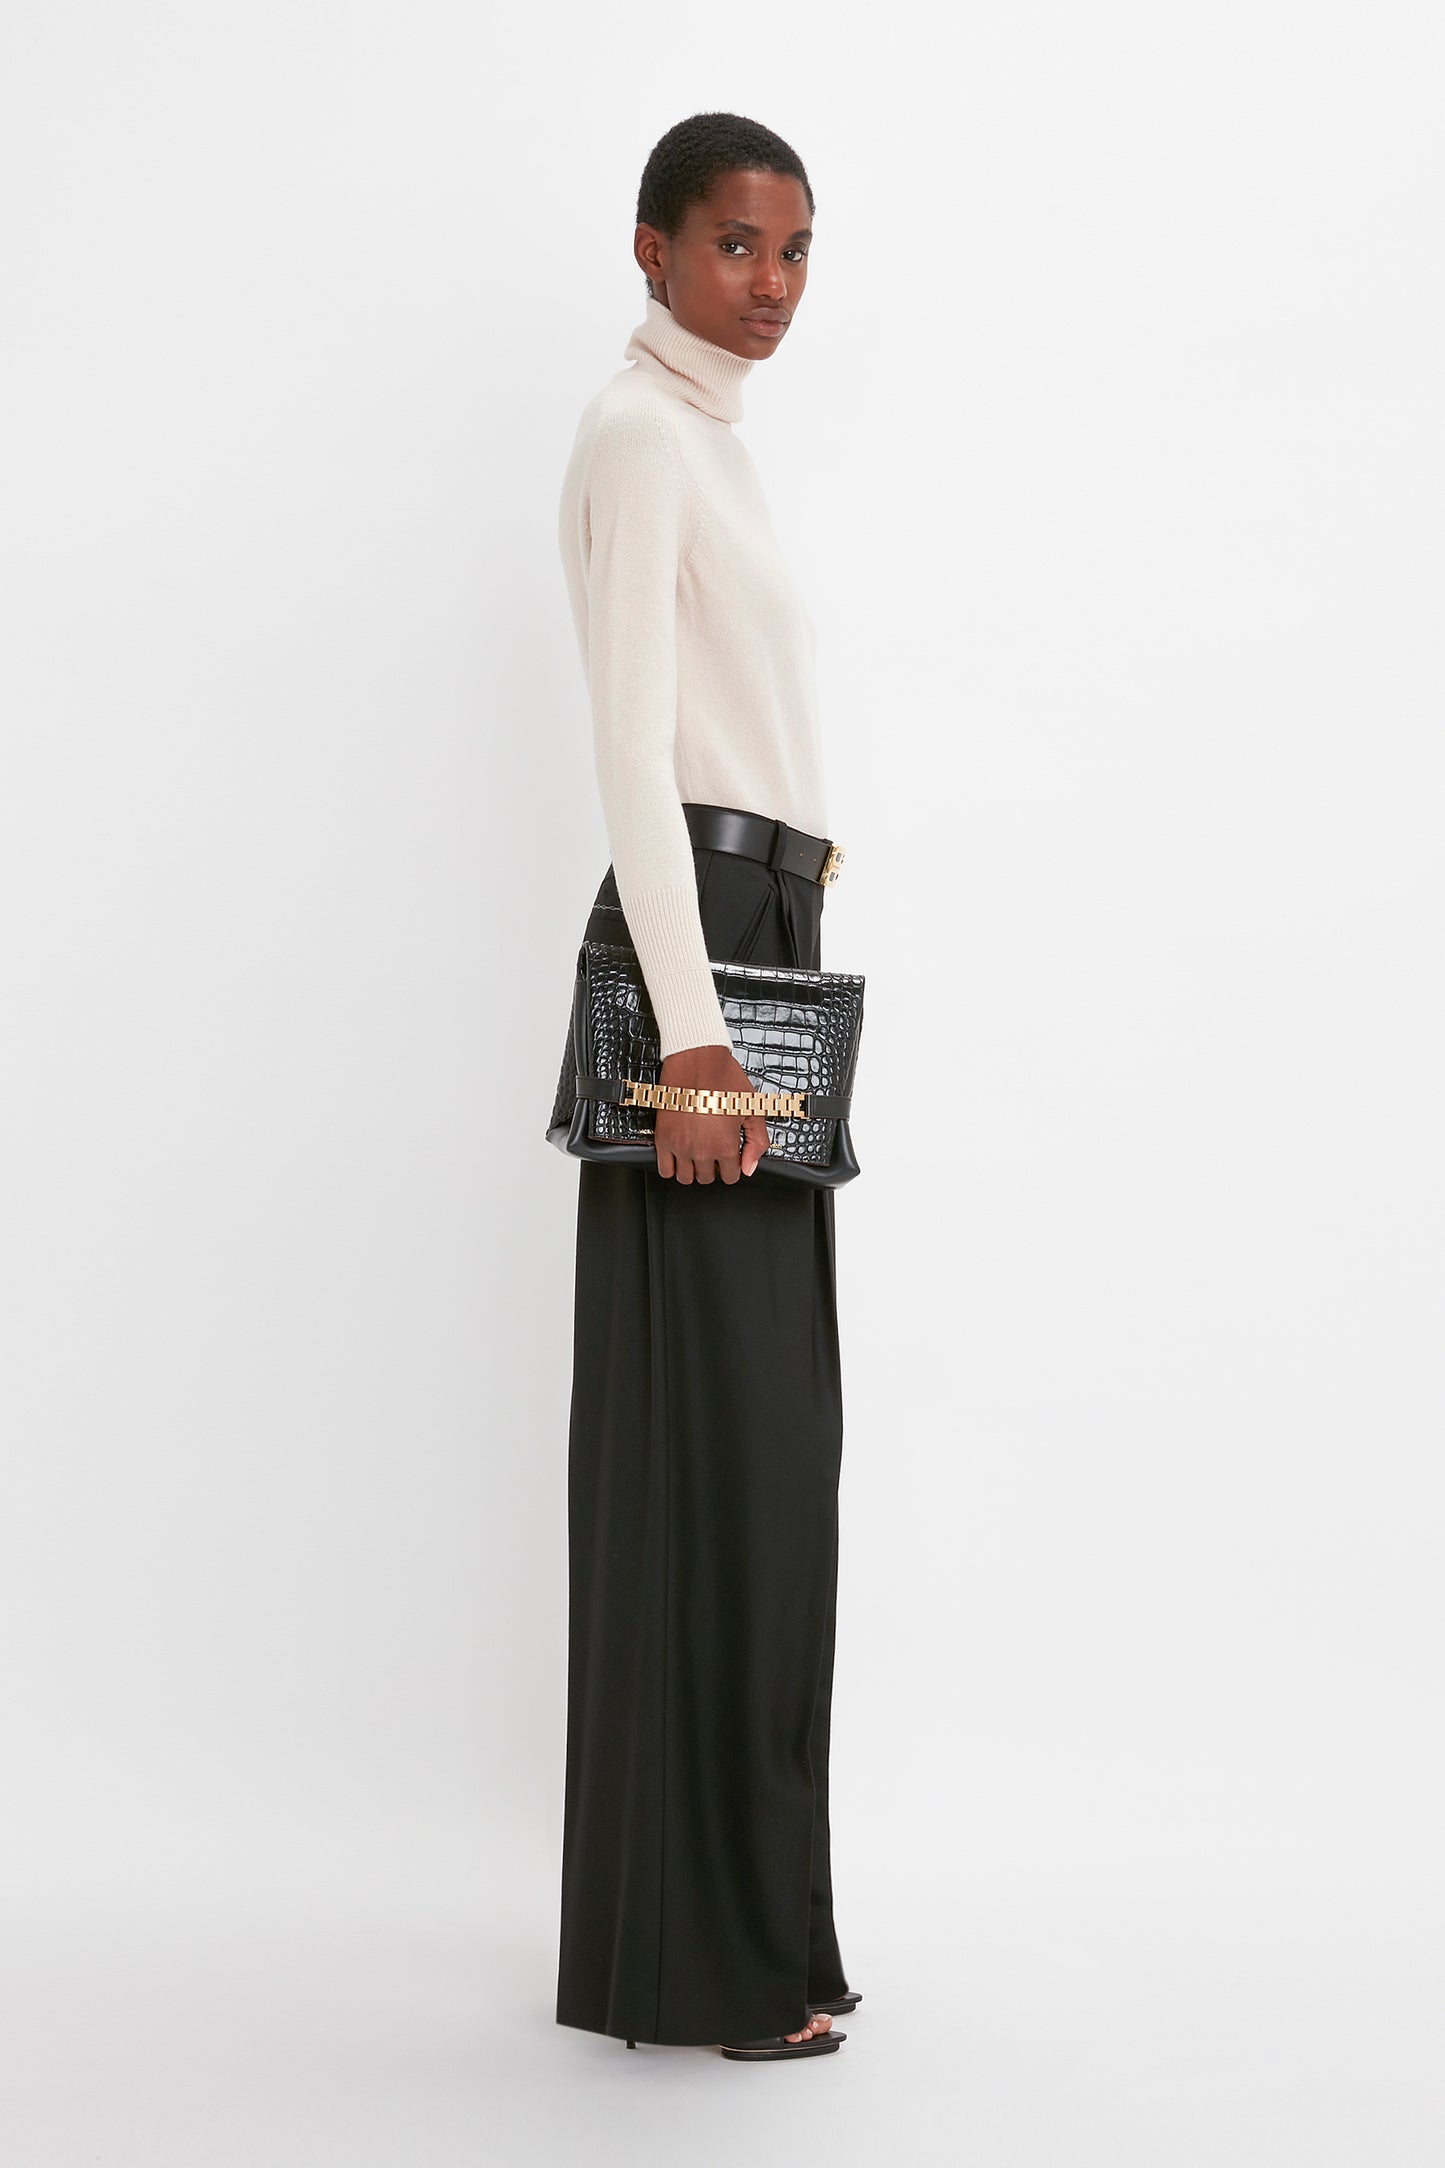 A woman in a cream lambswool Victoria Beckham polo neck sweater and black trousers holds a studded black handbag, looking over her shoulder against a white background.